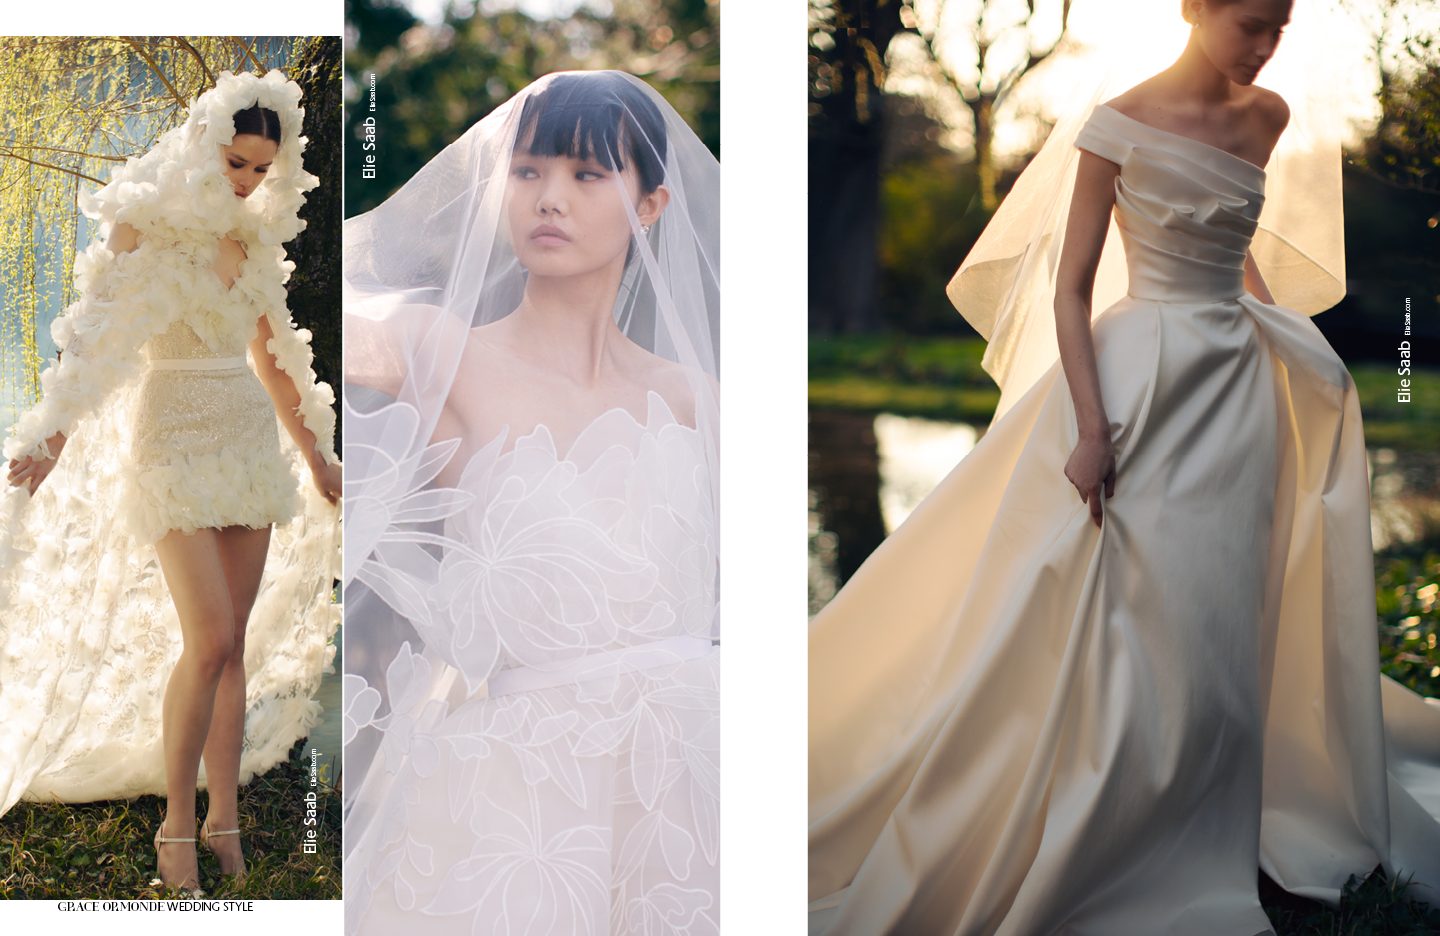 A Fashion Trend We're Loving: Brides Wearing Capes